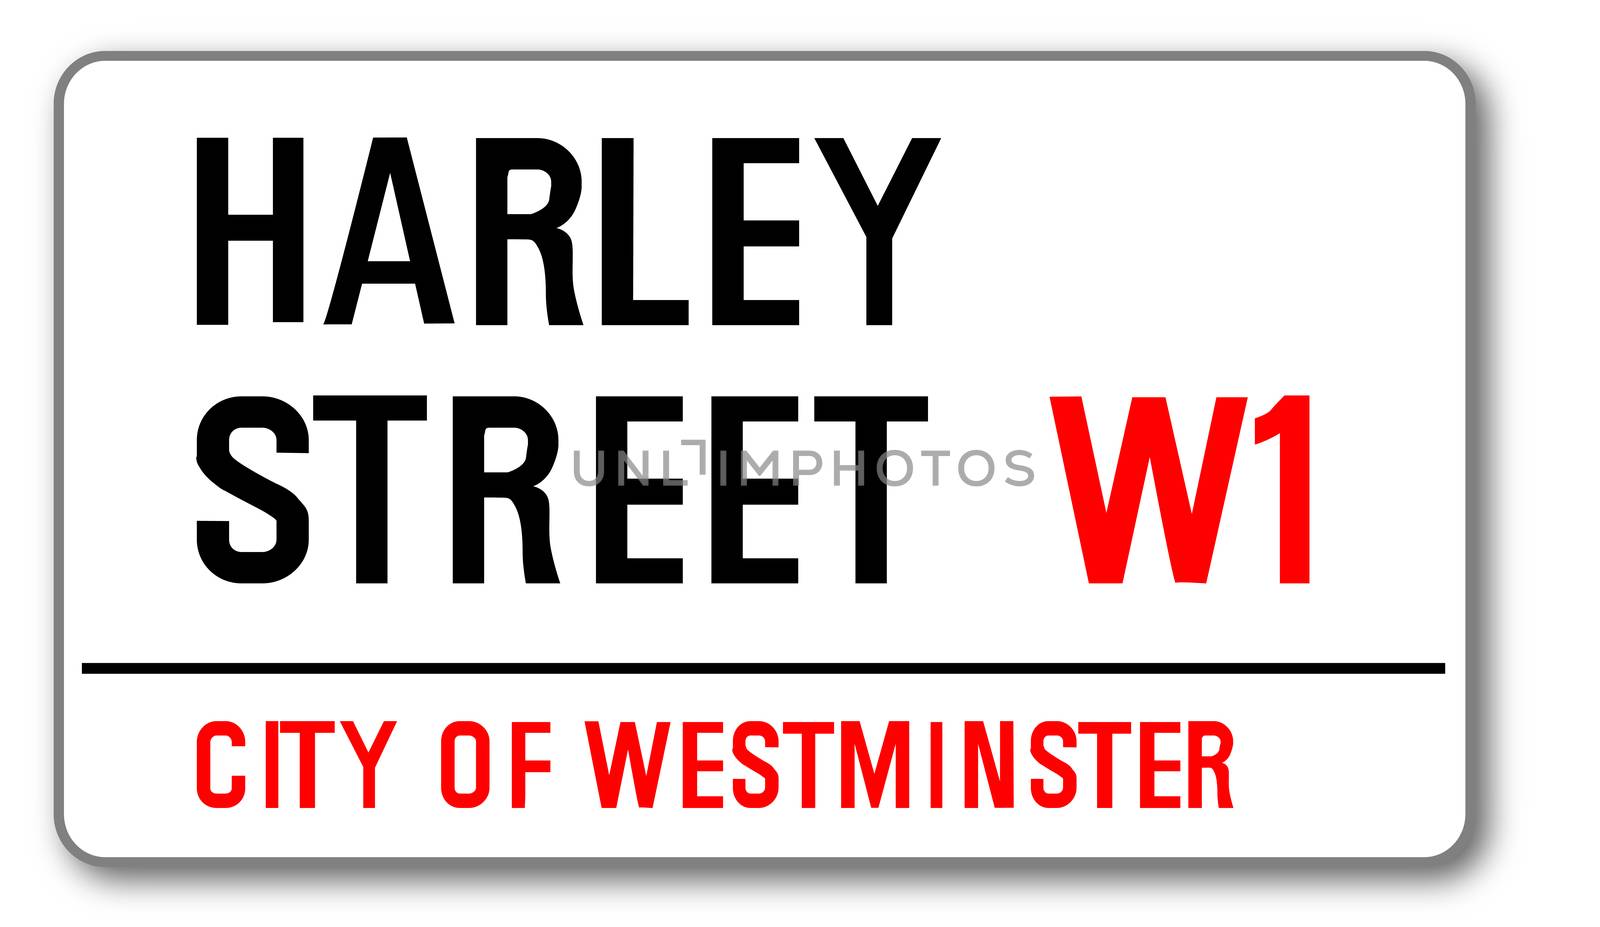 The street name sign from Harley Street West One... The famous street in London used by famour doctors.